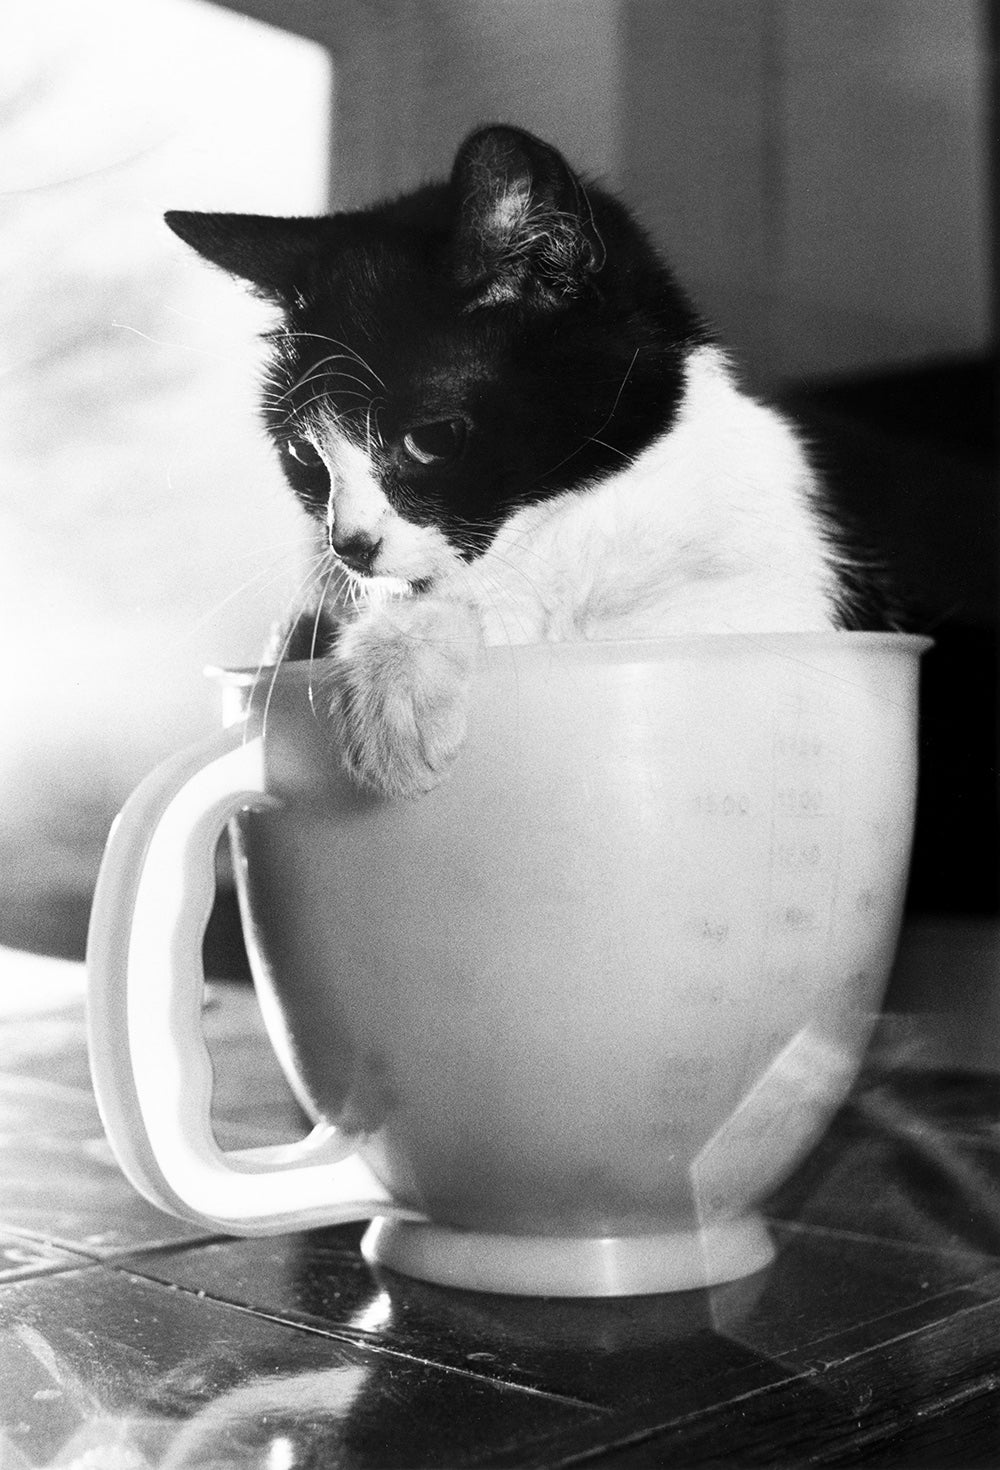 Vintage photos of cats prove that felines have a timeless style.